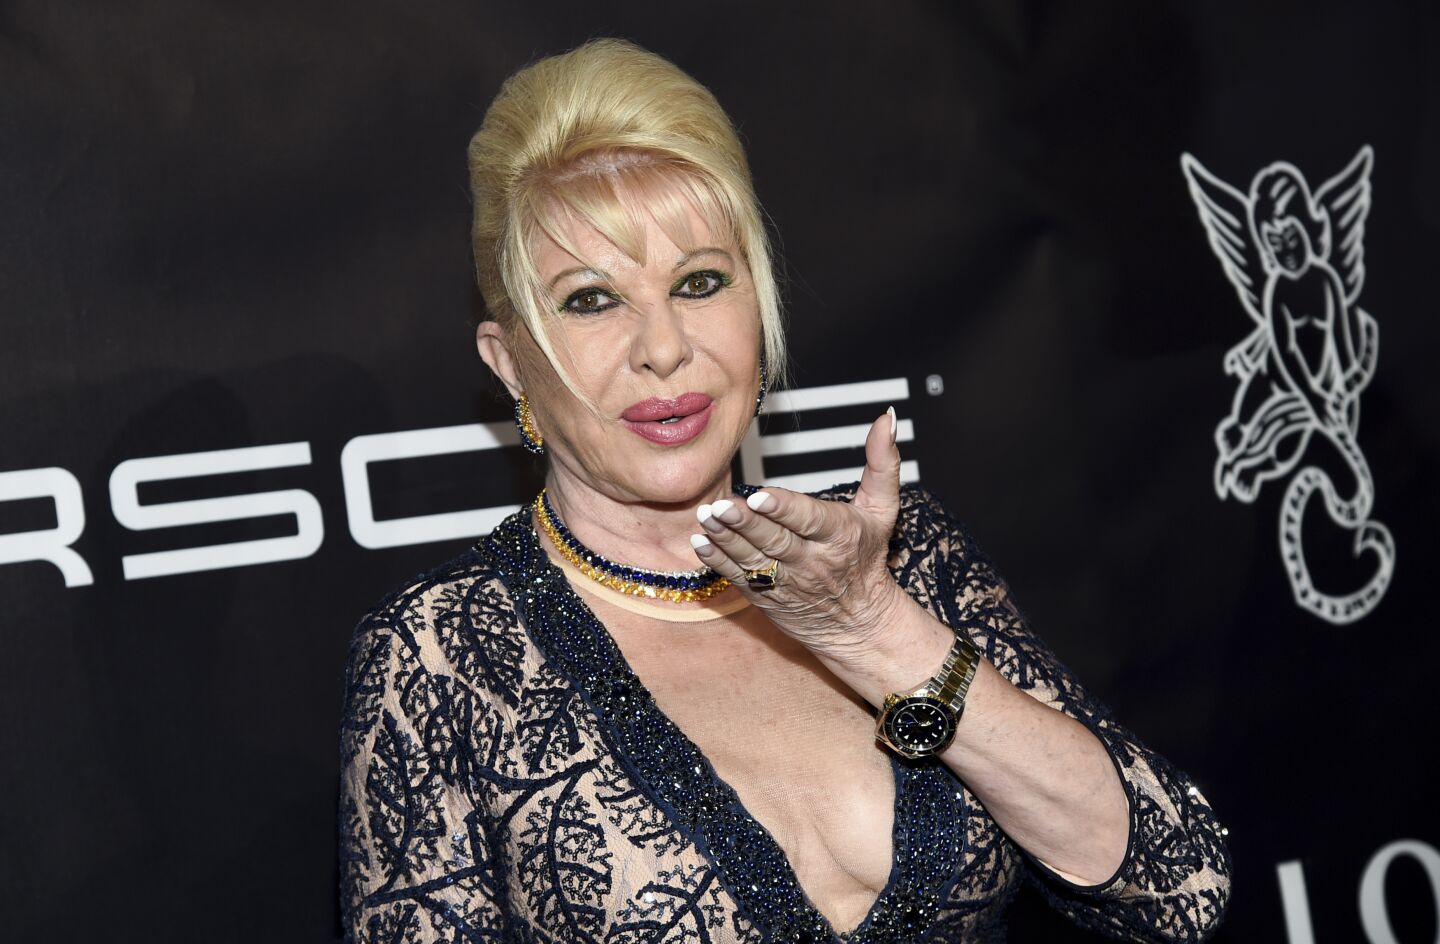 Ivana Trump, the first wife of former President Trump and mother of his oldest children, died at 72. In the 1980s, the Trumps were the ultimate power couple in New York before their divorce. Ivana Trump, a businesswoman who became an icon in her own right, influenced the look of the over-the-top Patsy Stone in the classic British sitcom “Absolutely Fabulous” and also had a long list of cameos on TV and in movies. She had continued her business ventures in recent years, promoting an Italian weight-loss diet in 2018.